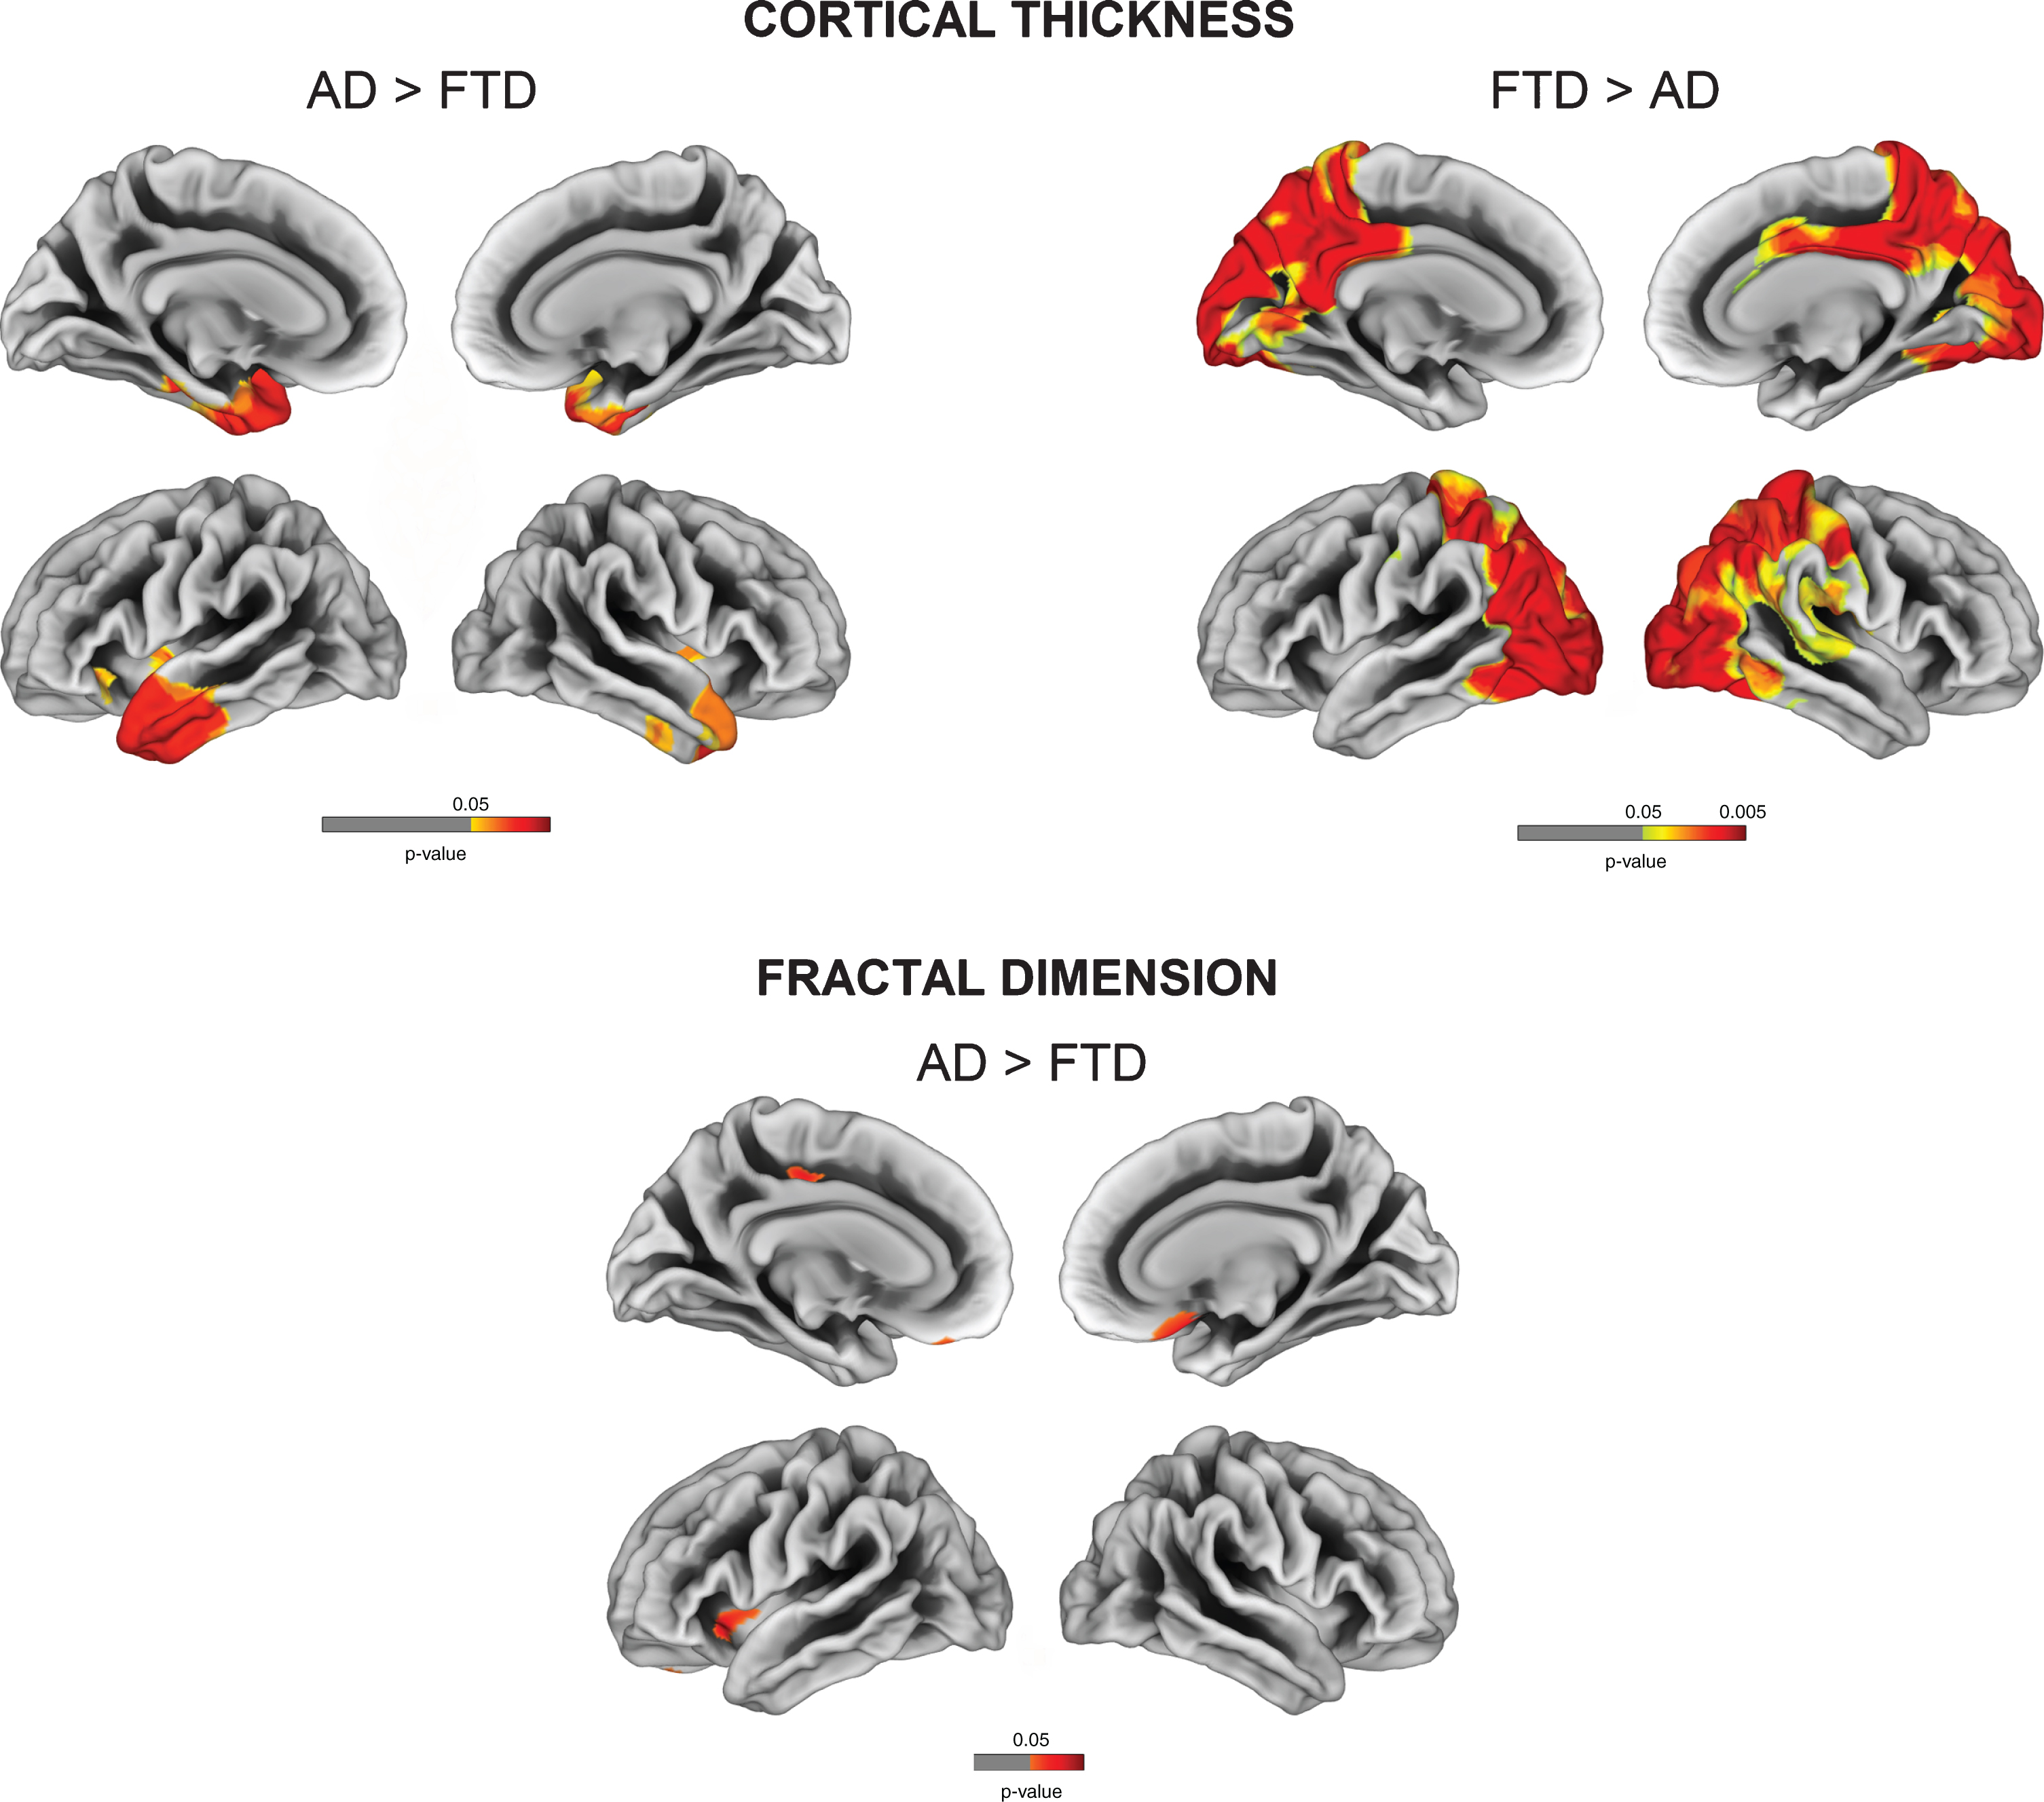 Vertex-wise cortical thickness and fractal dimension comparisons between AD and FTD (FDR-corrected p < 0.05).